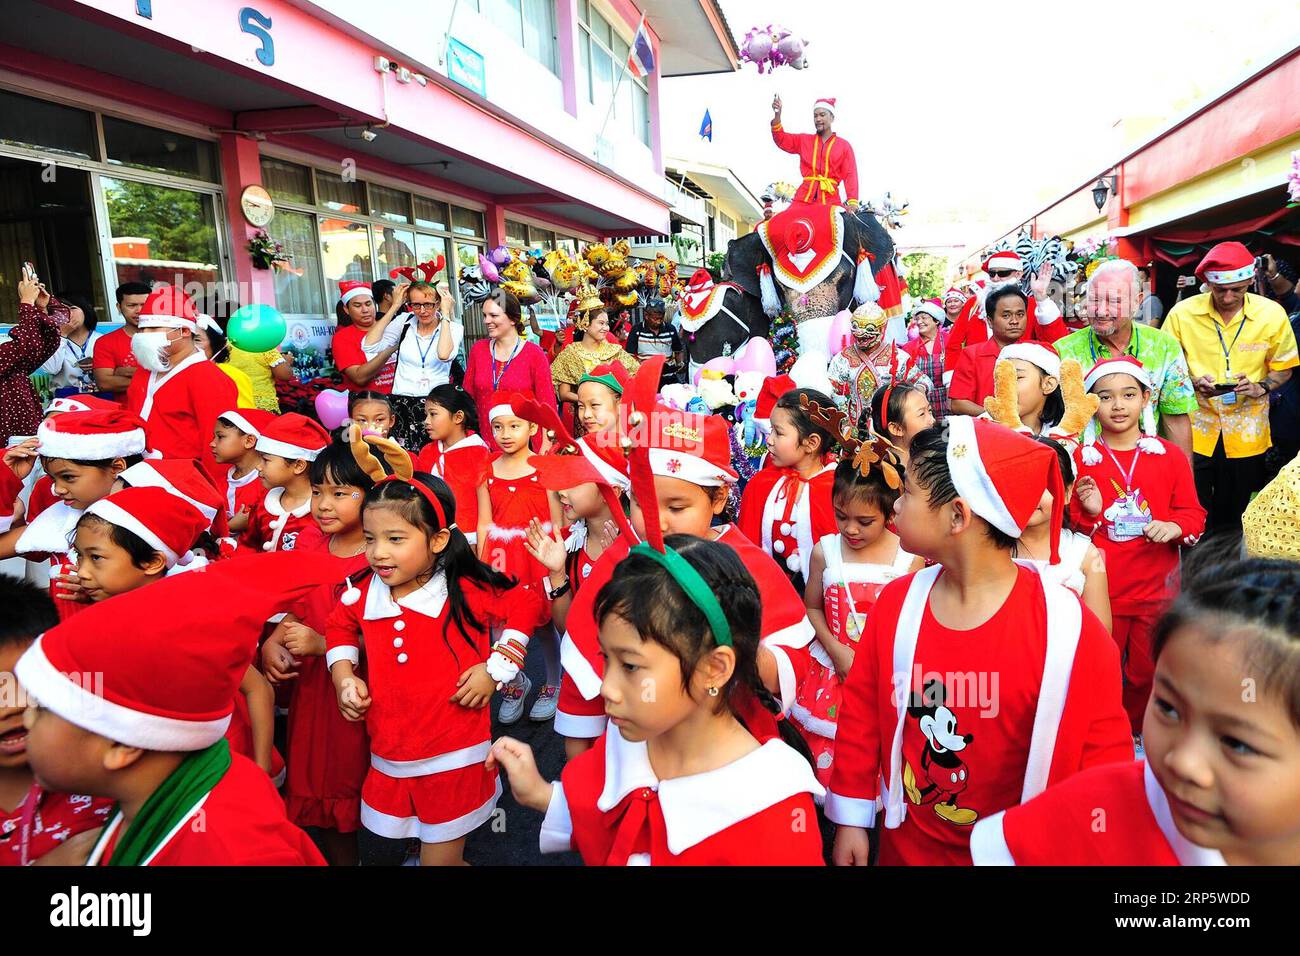 (181224) -- AYUTTHAYA, Dec. 24, 2018 (Xinhua) -- People participate in Christmas celebrations at a school in Ayutthaya province, Thailand, Dec. 24, 2018. The annual event is held to celebrate Christmas and promote tourism in Ayutthaya. (Xinhua/Rachen Sageamsak) THAILAND-AYUTTHAYA-CHRISTMAS PUBLICATIONxNOTxINxCHN Stock Photo